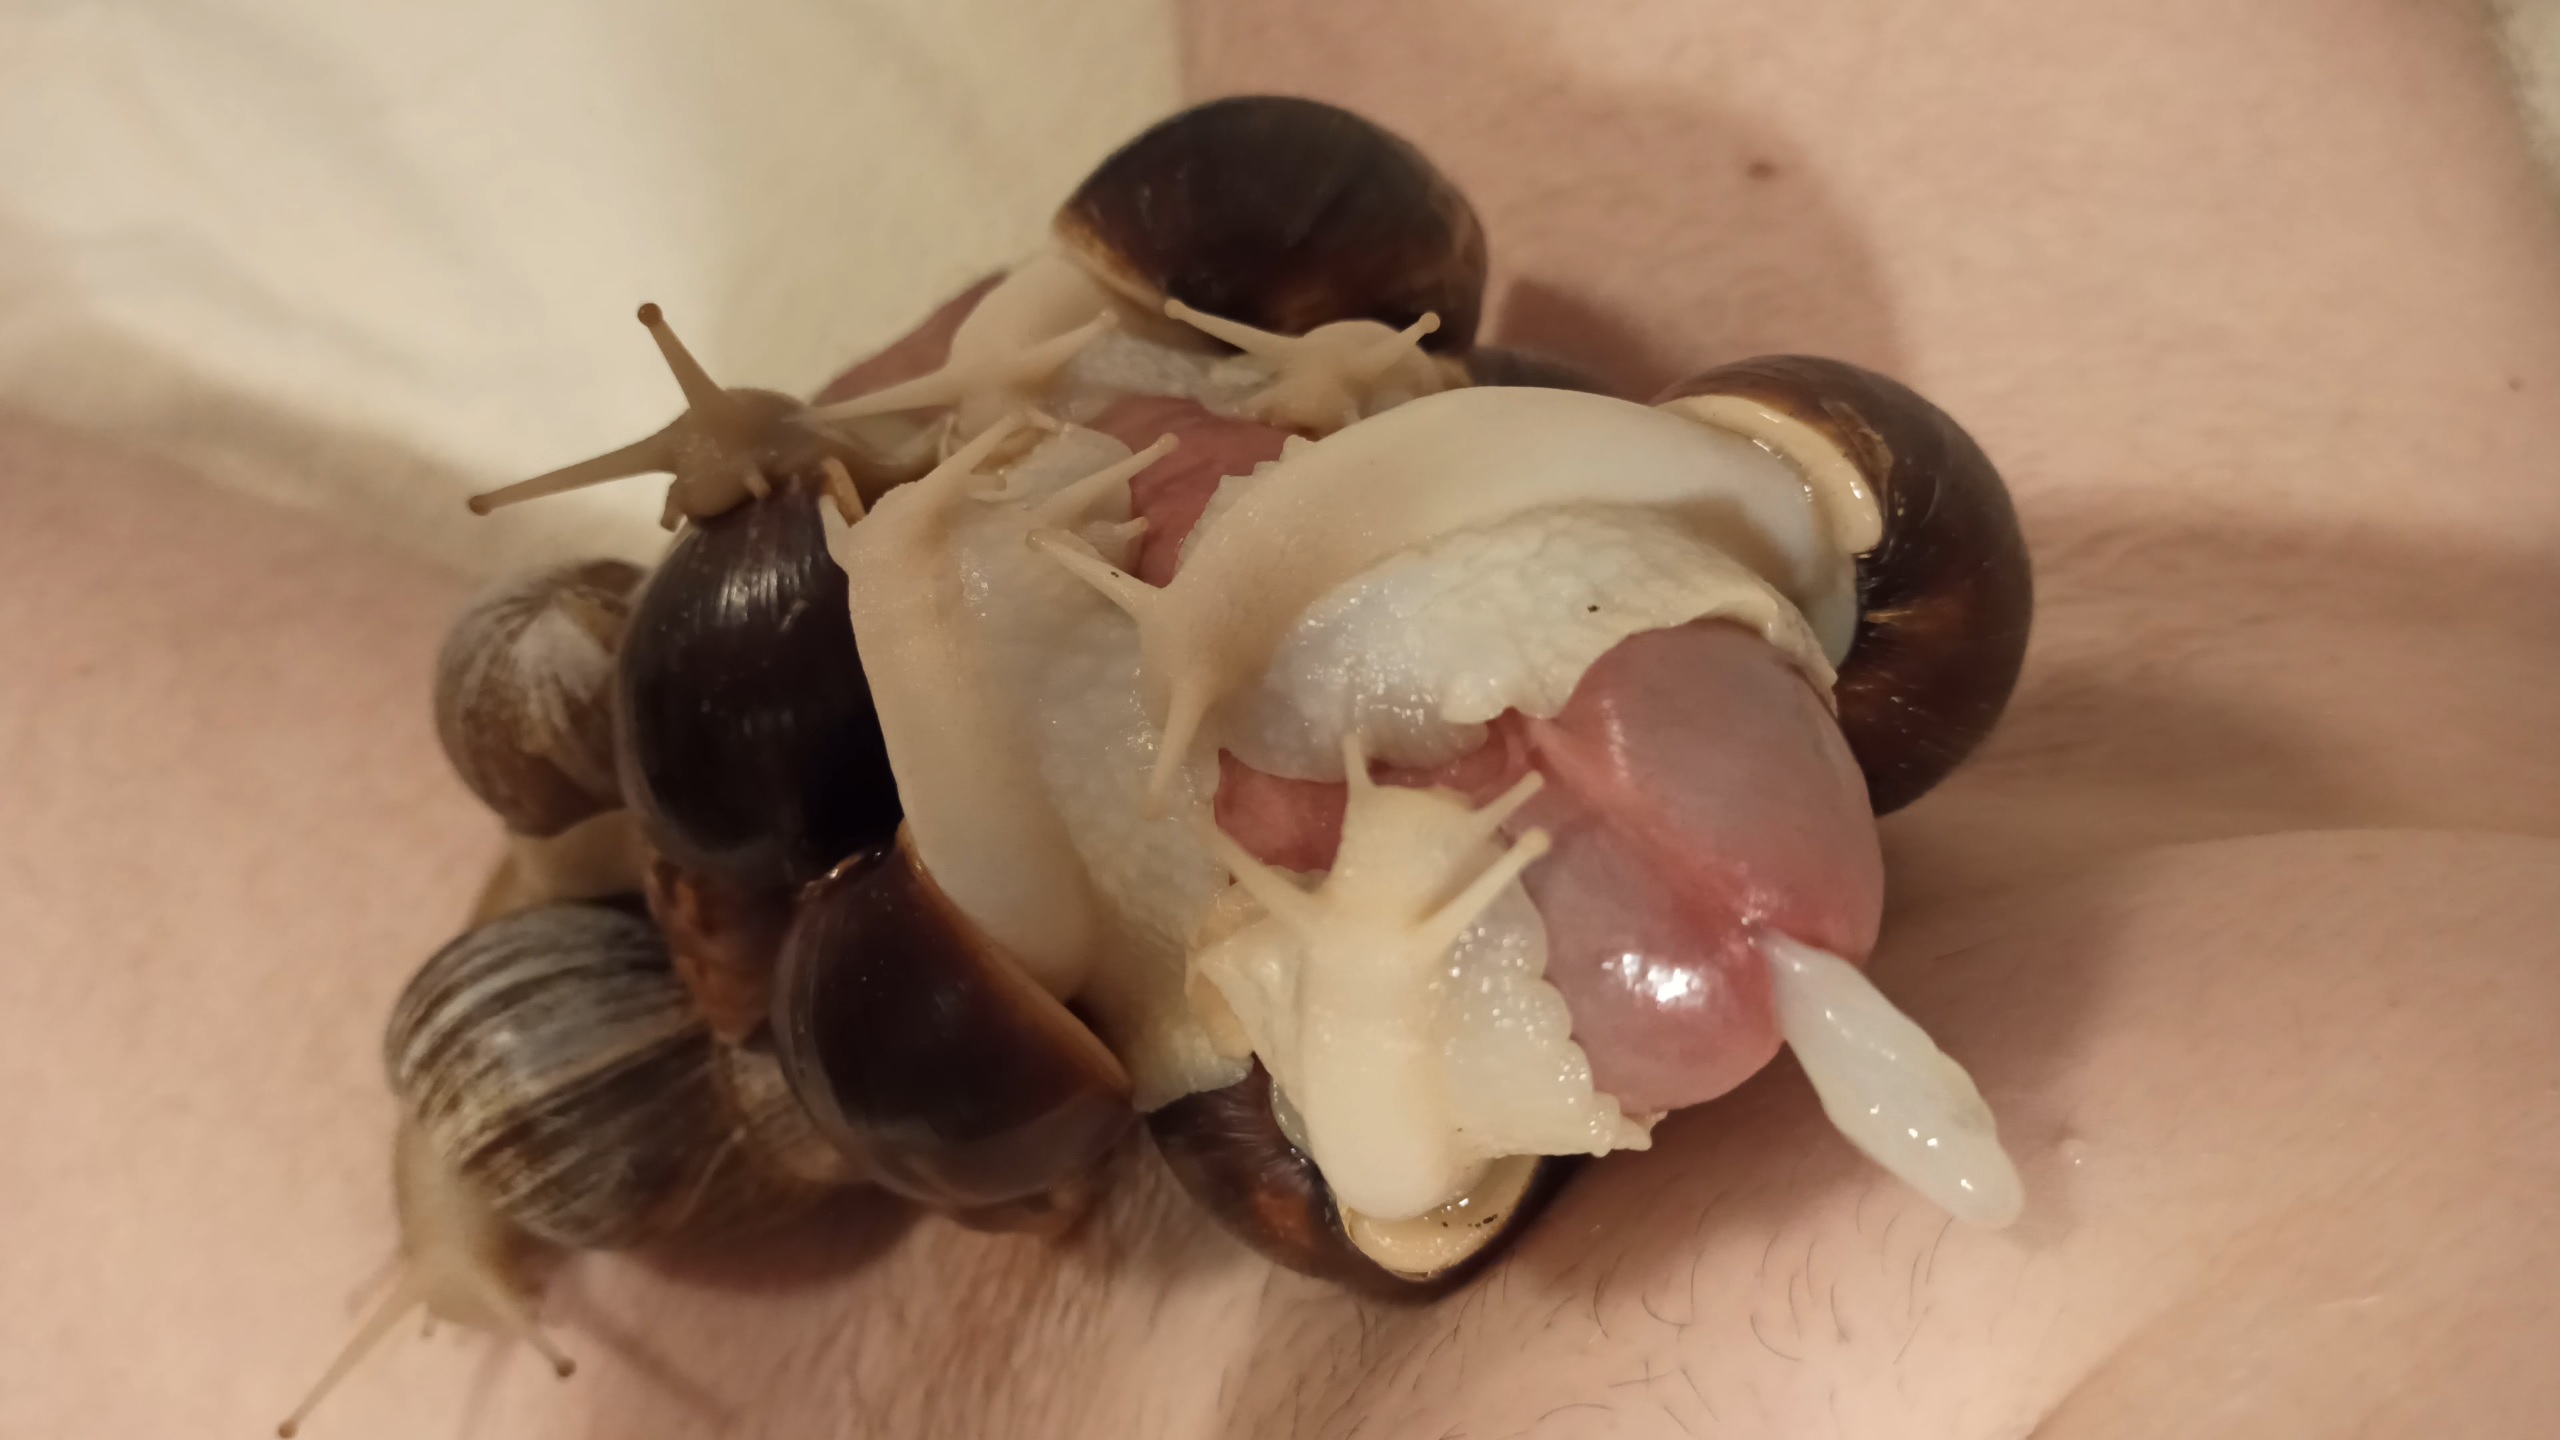 Snails dominate my cock and slowly make me cum